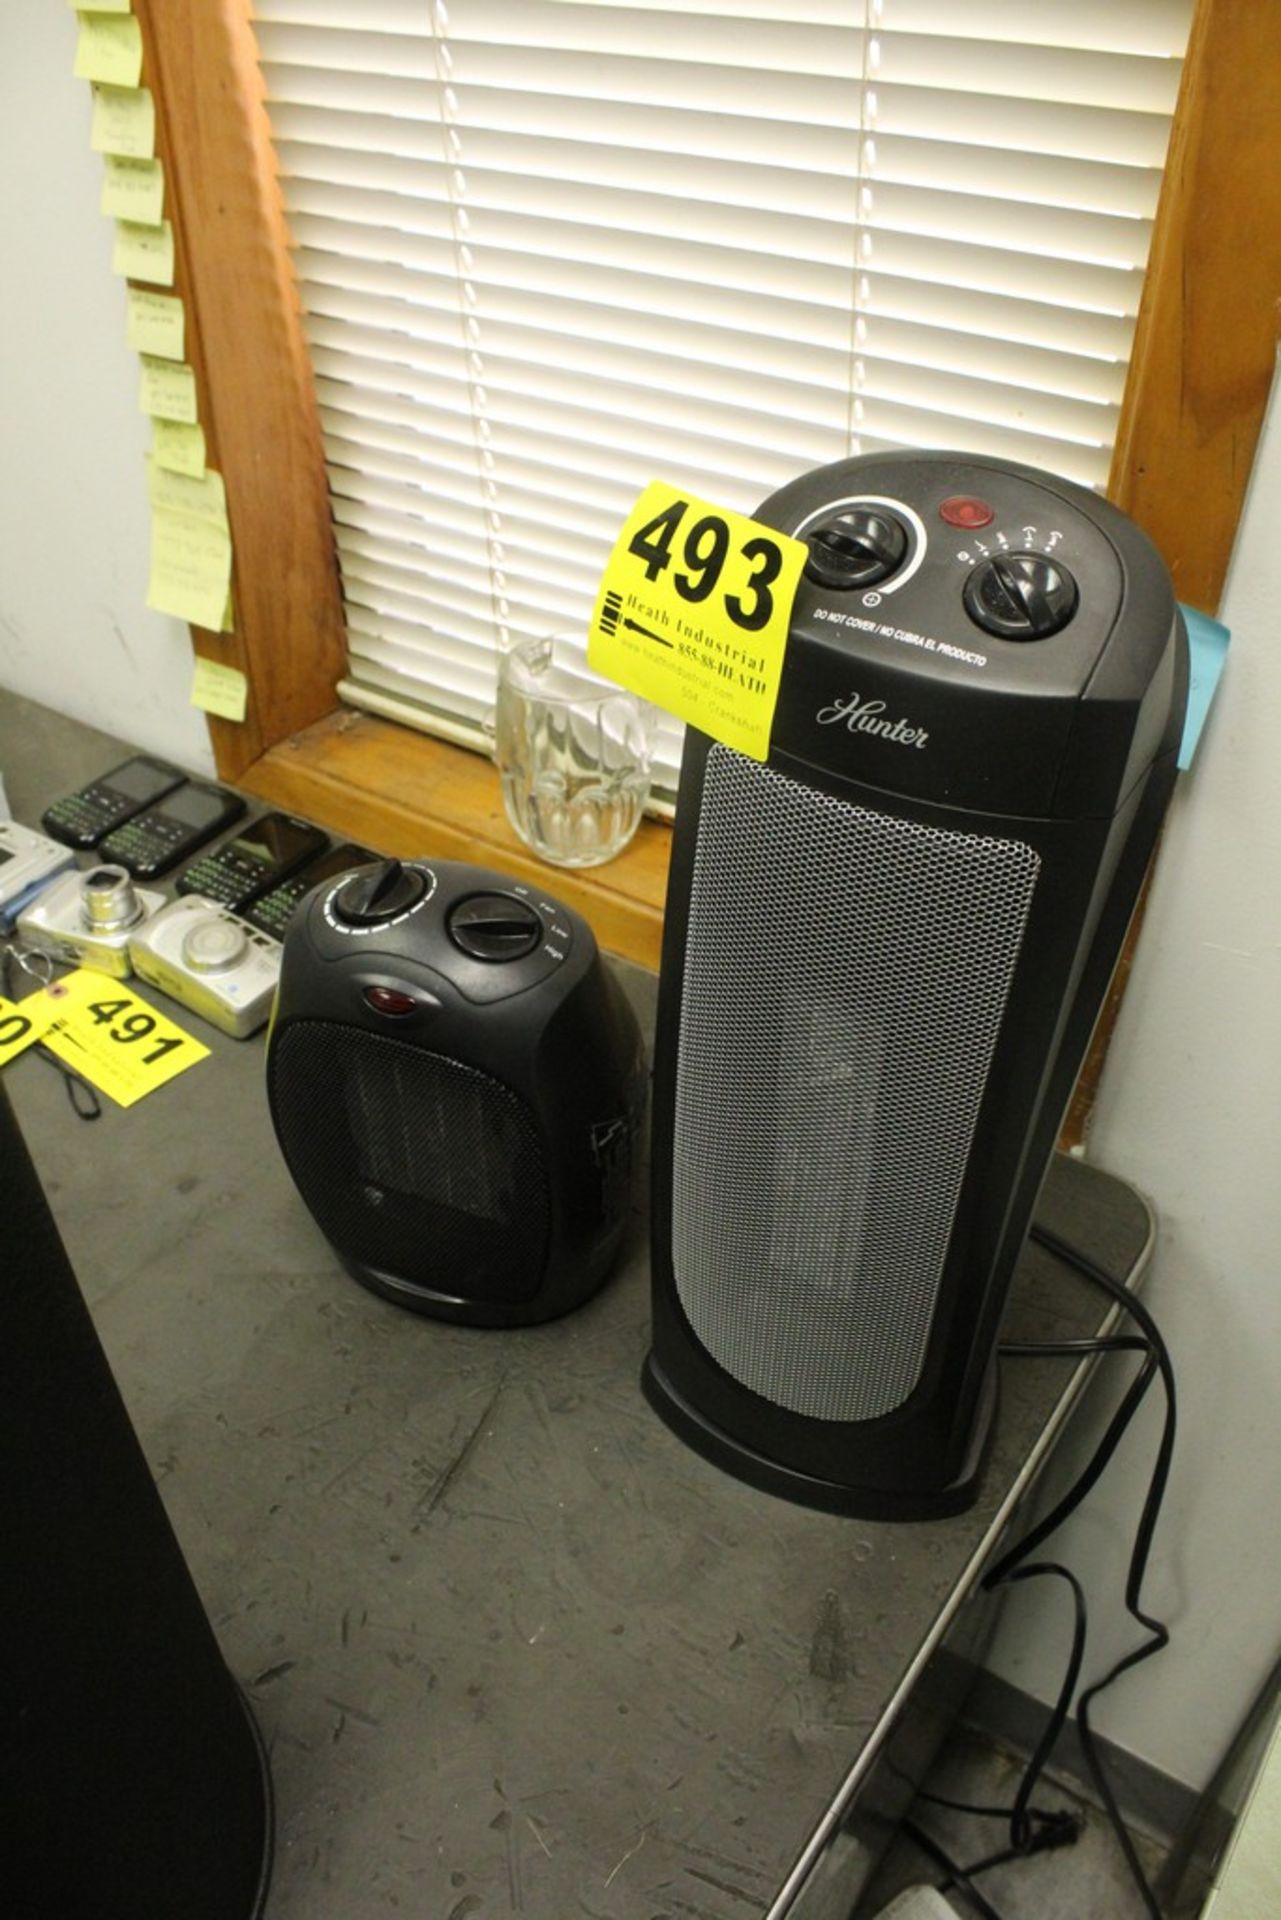 (2) ASSORTED ELECTRIC HEATERS